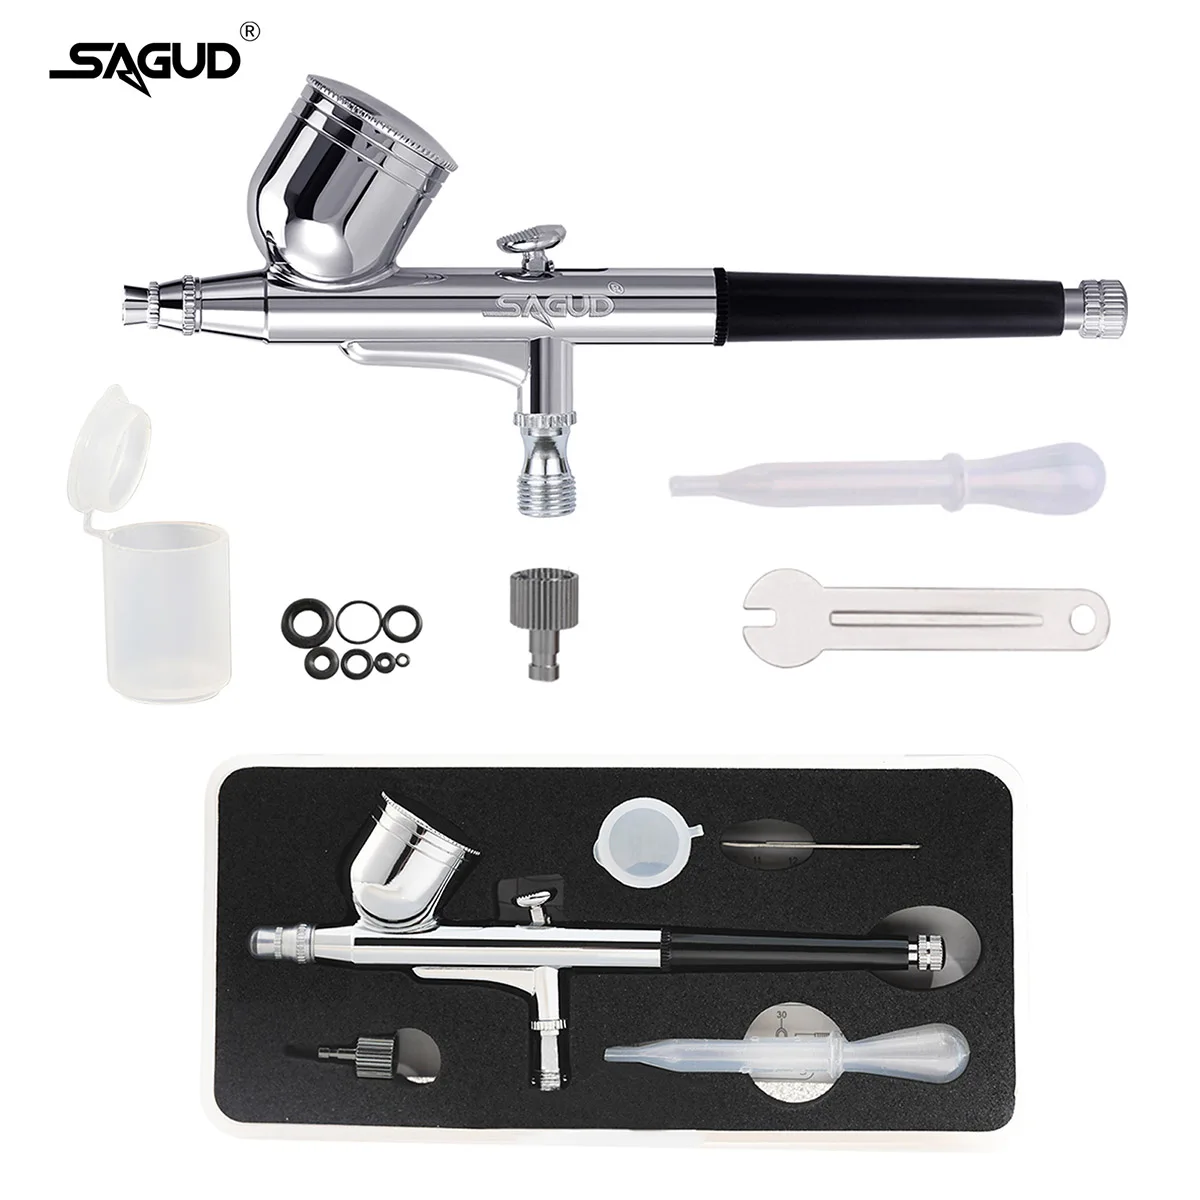 

SAGUD Airbrushes Multi-Purpose 0.3mm Dual-Action Gravity Feed Airbrush Set with 7CC Fluid Cup For Spray Art/Crafts/Tattoos/Cake